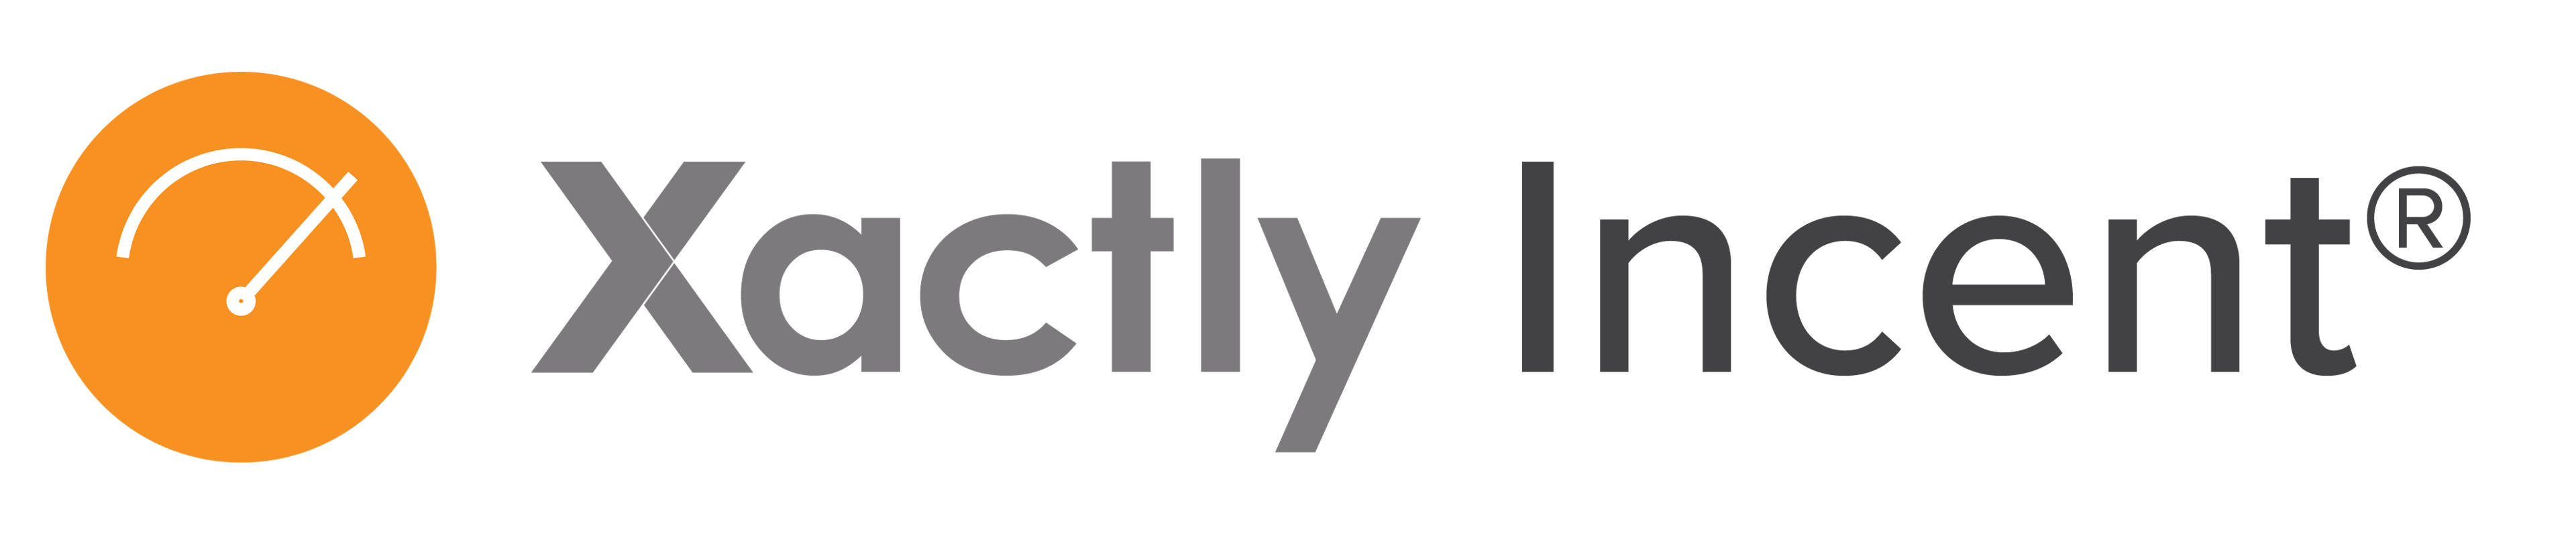 Xactly Incent Logo